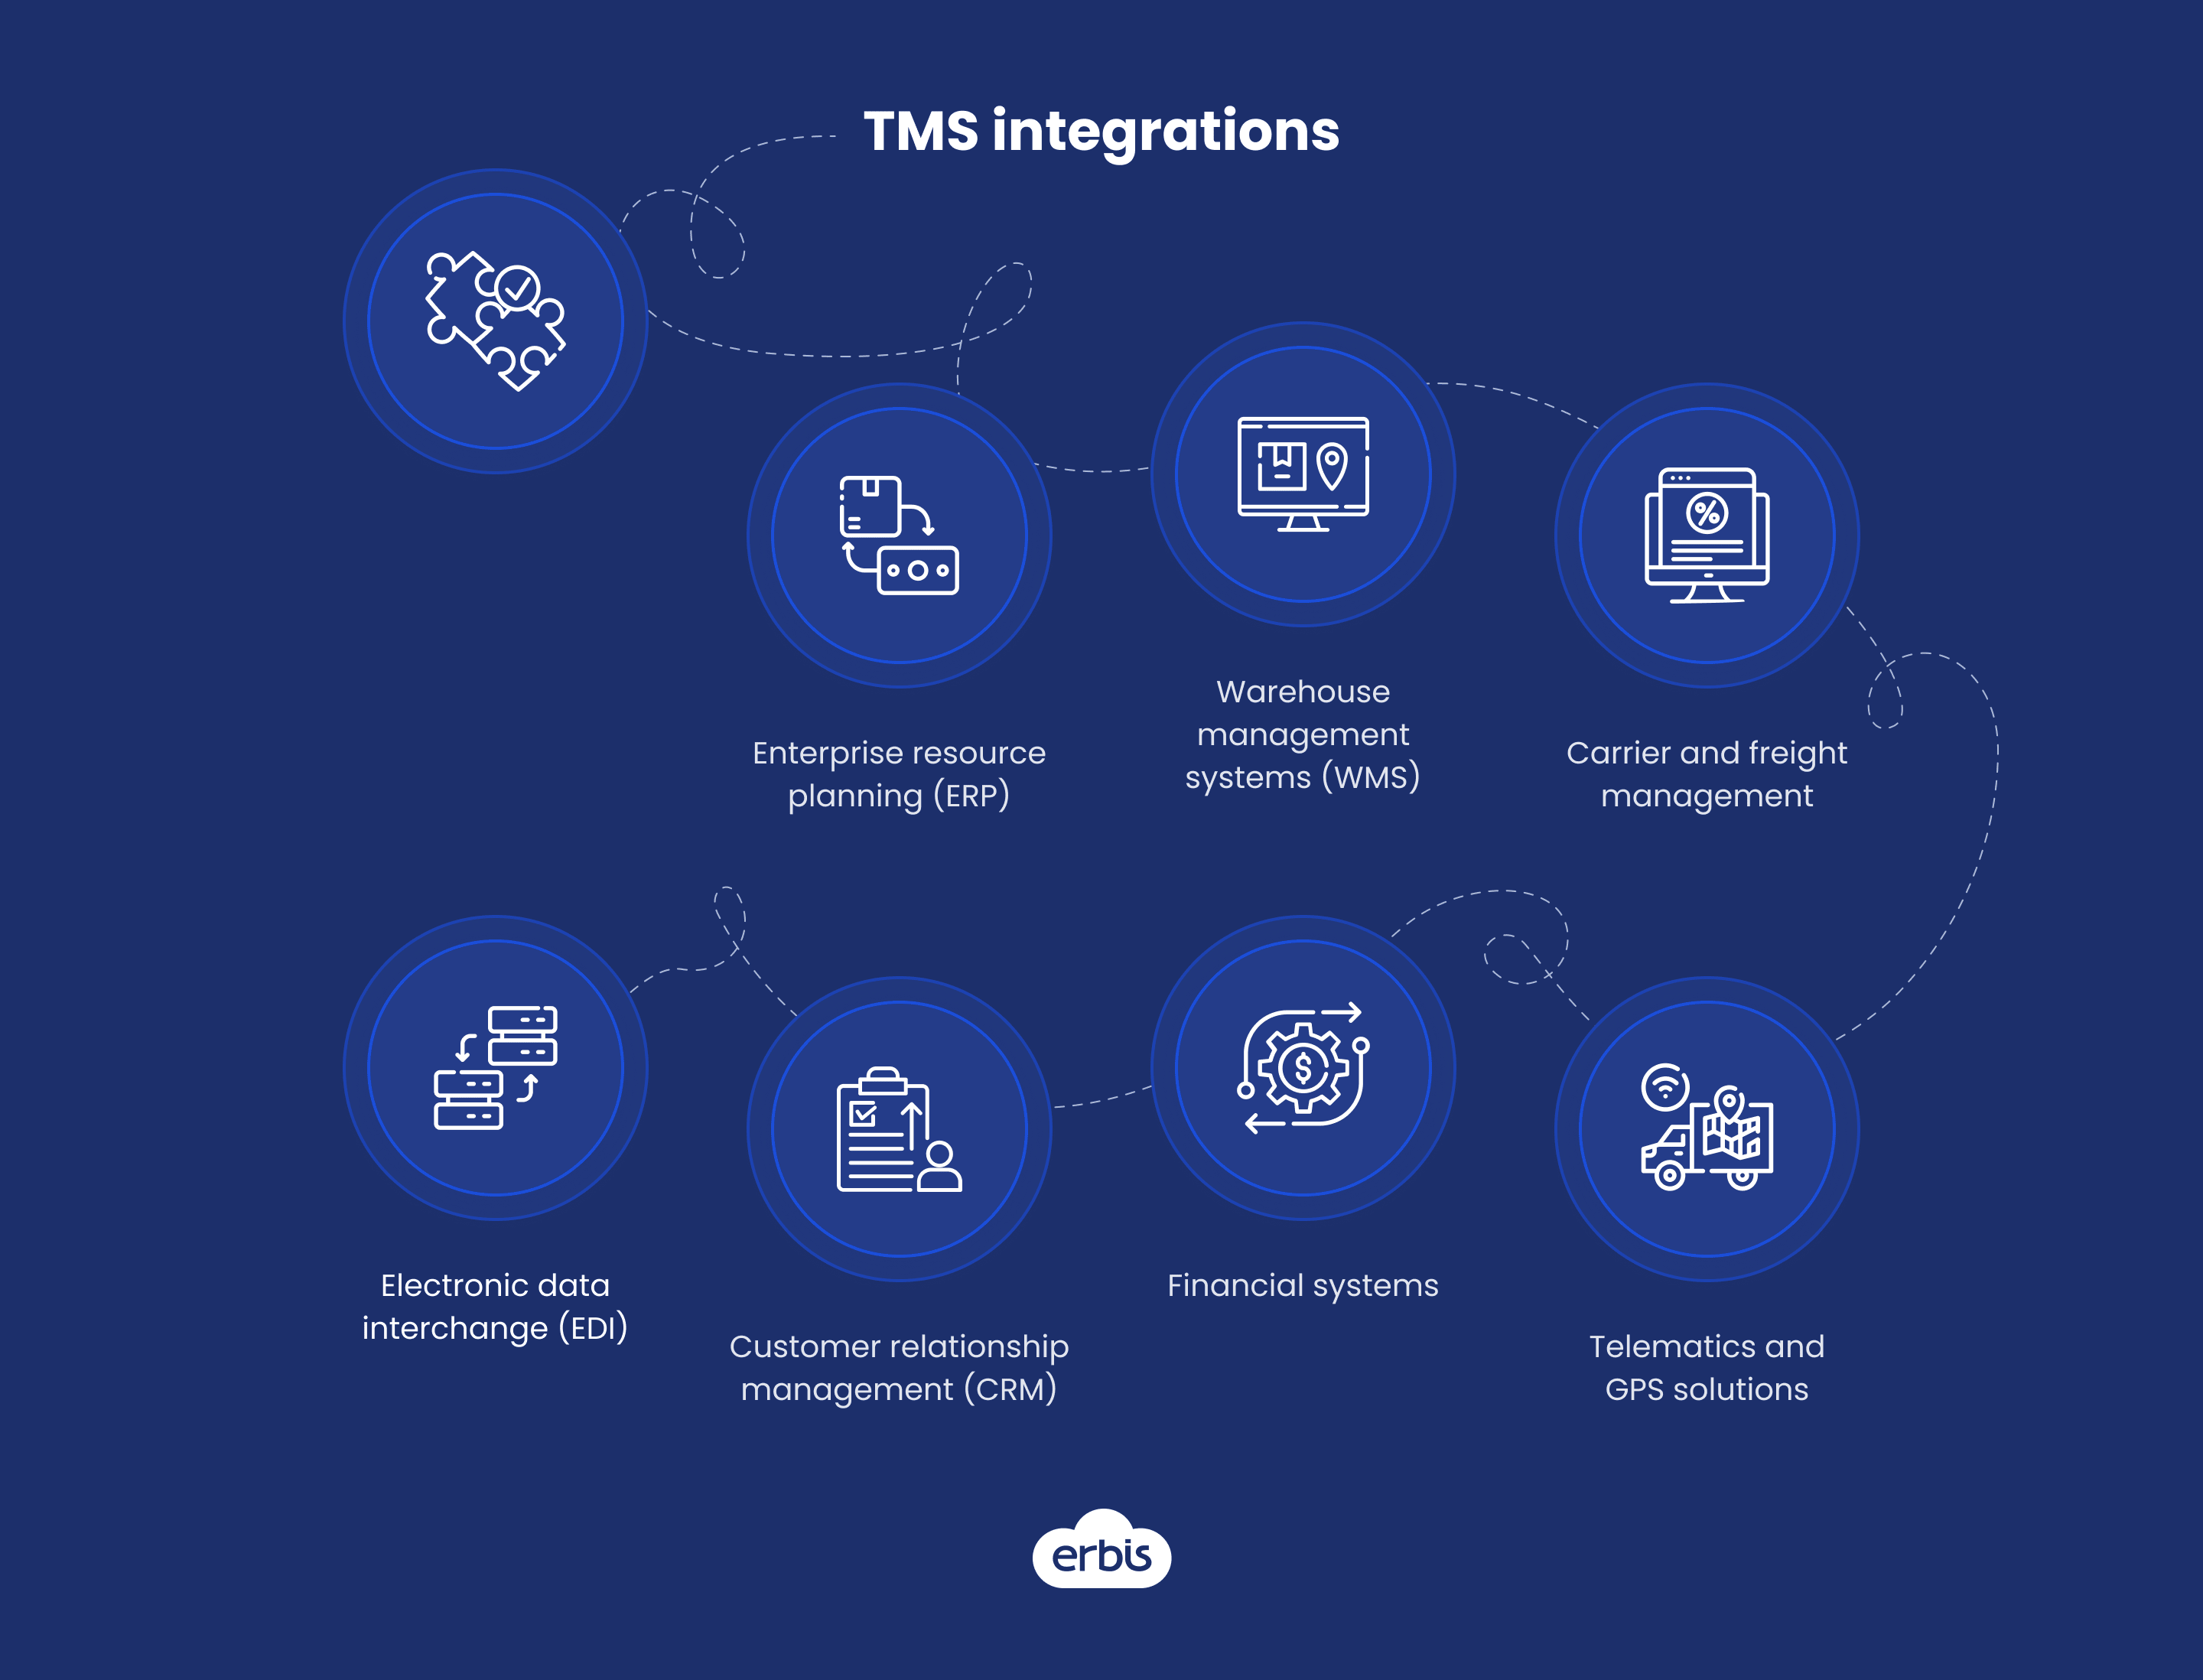 Third-party integrations of TMS